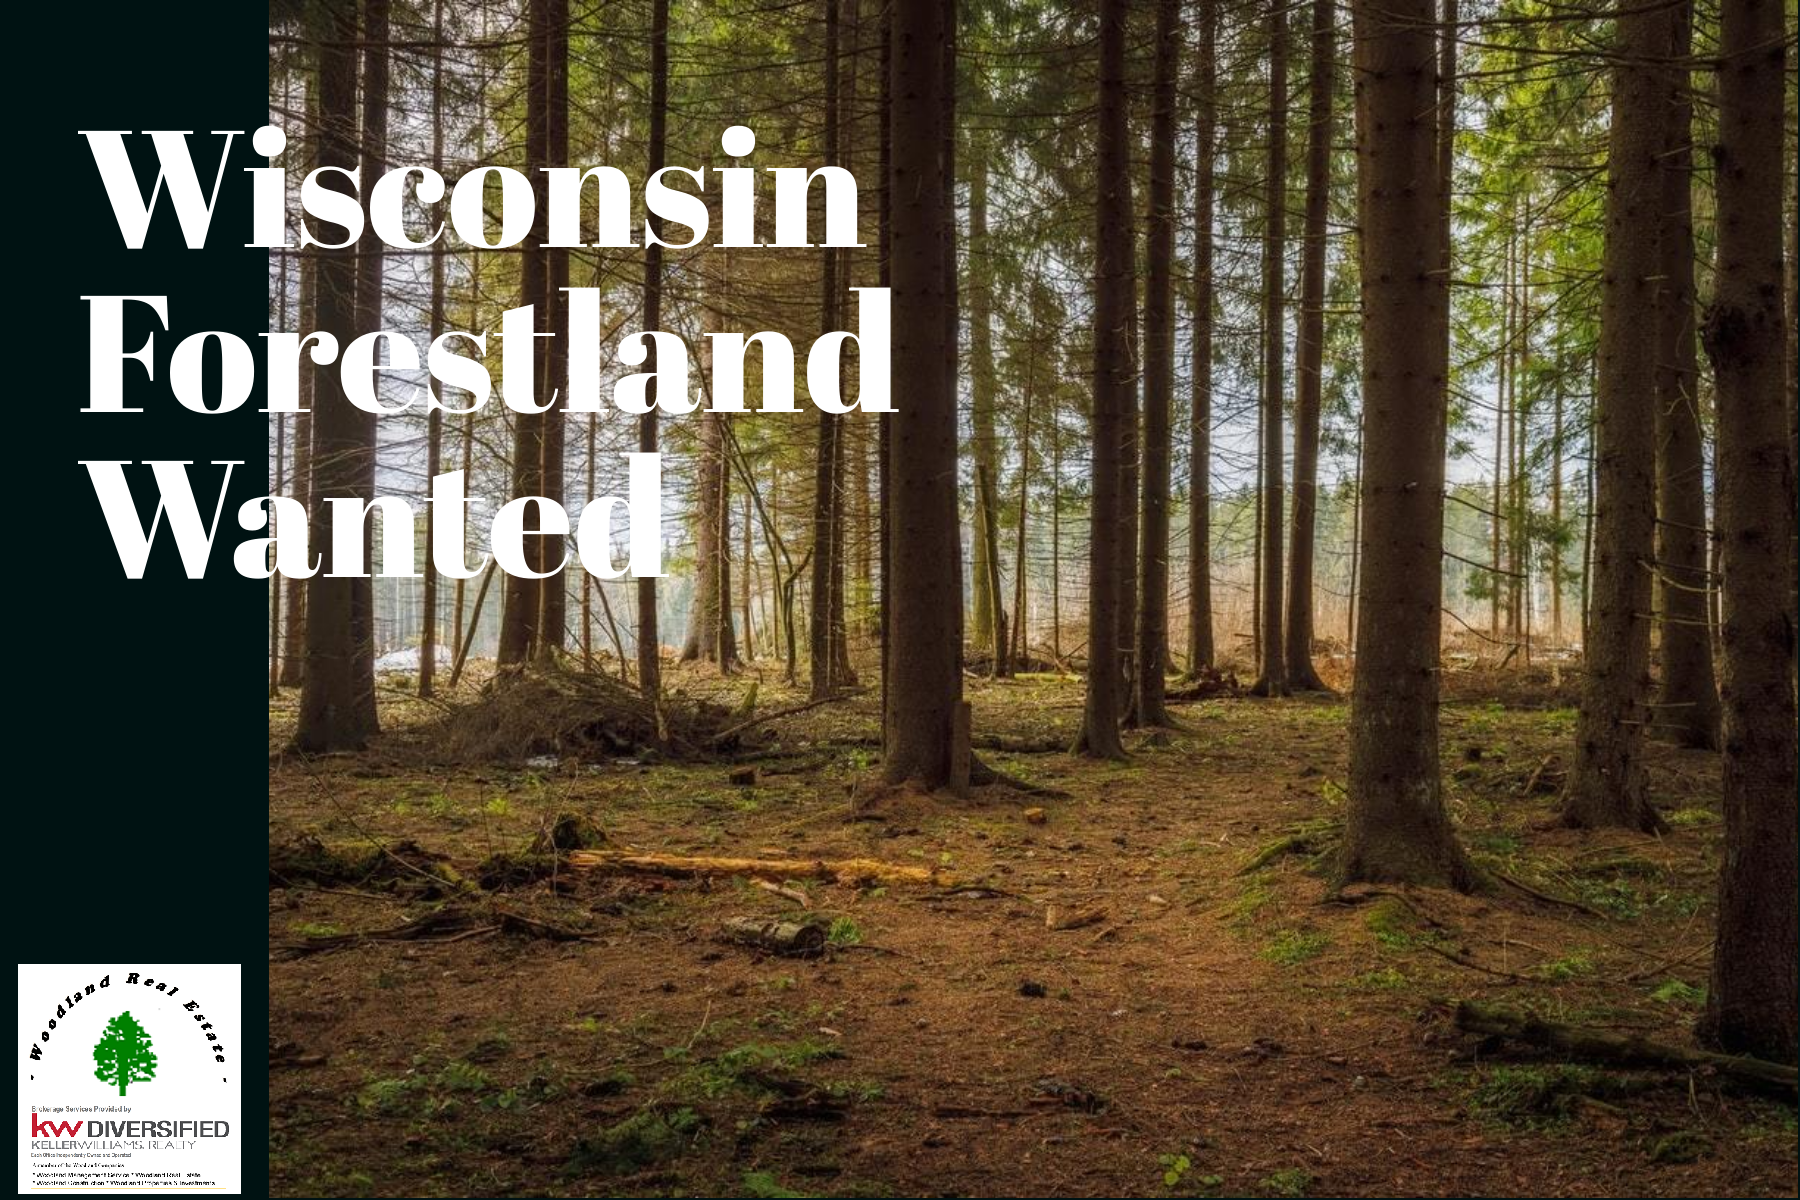 Wanted_Wisconsin_Forestland_1800x1200-layout1775-1ggbm9r_1_.png